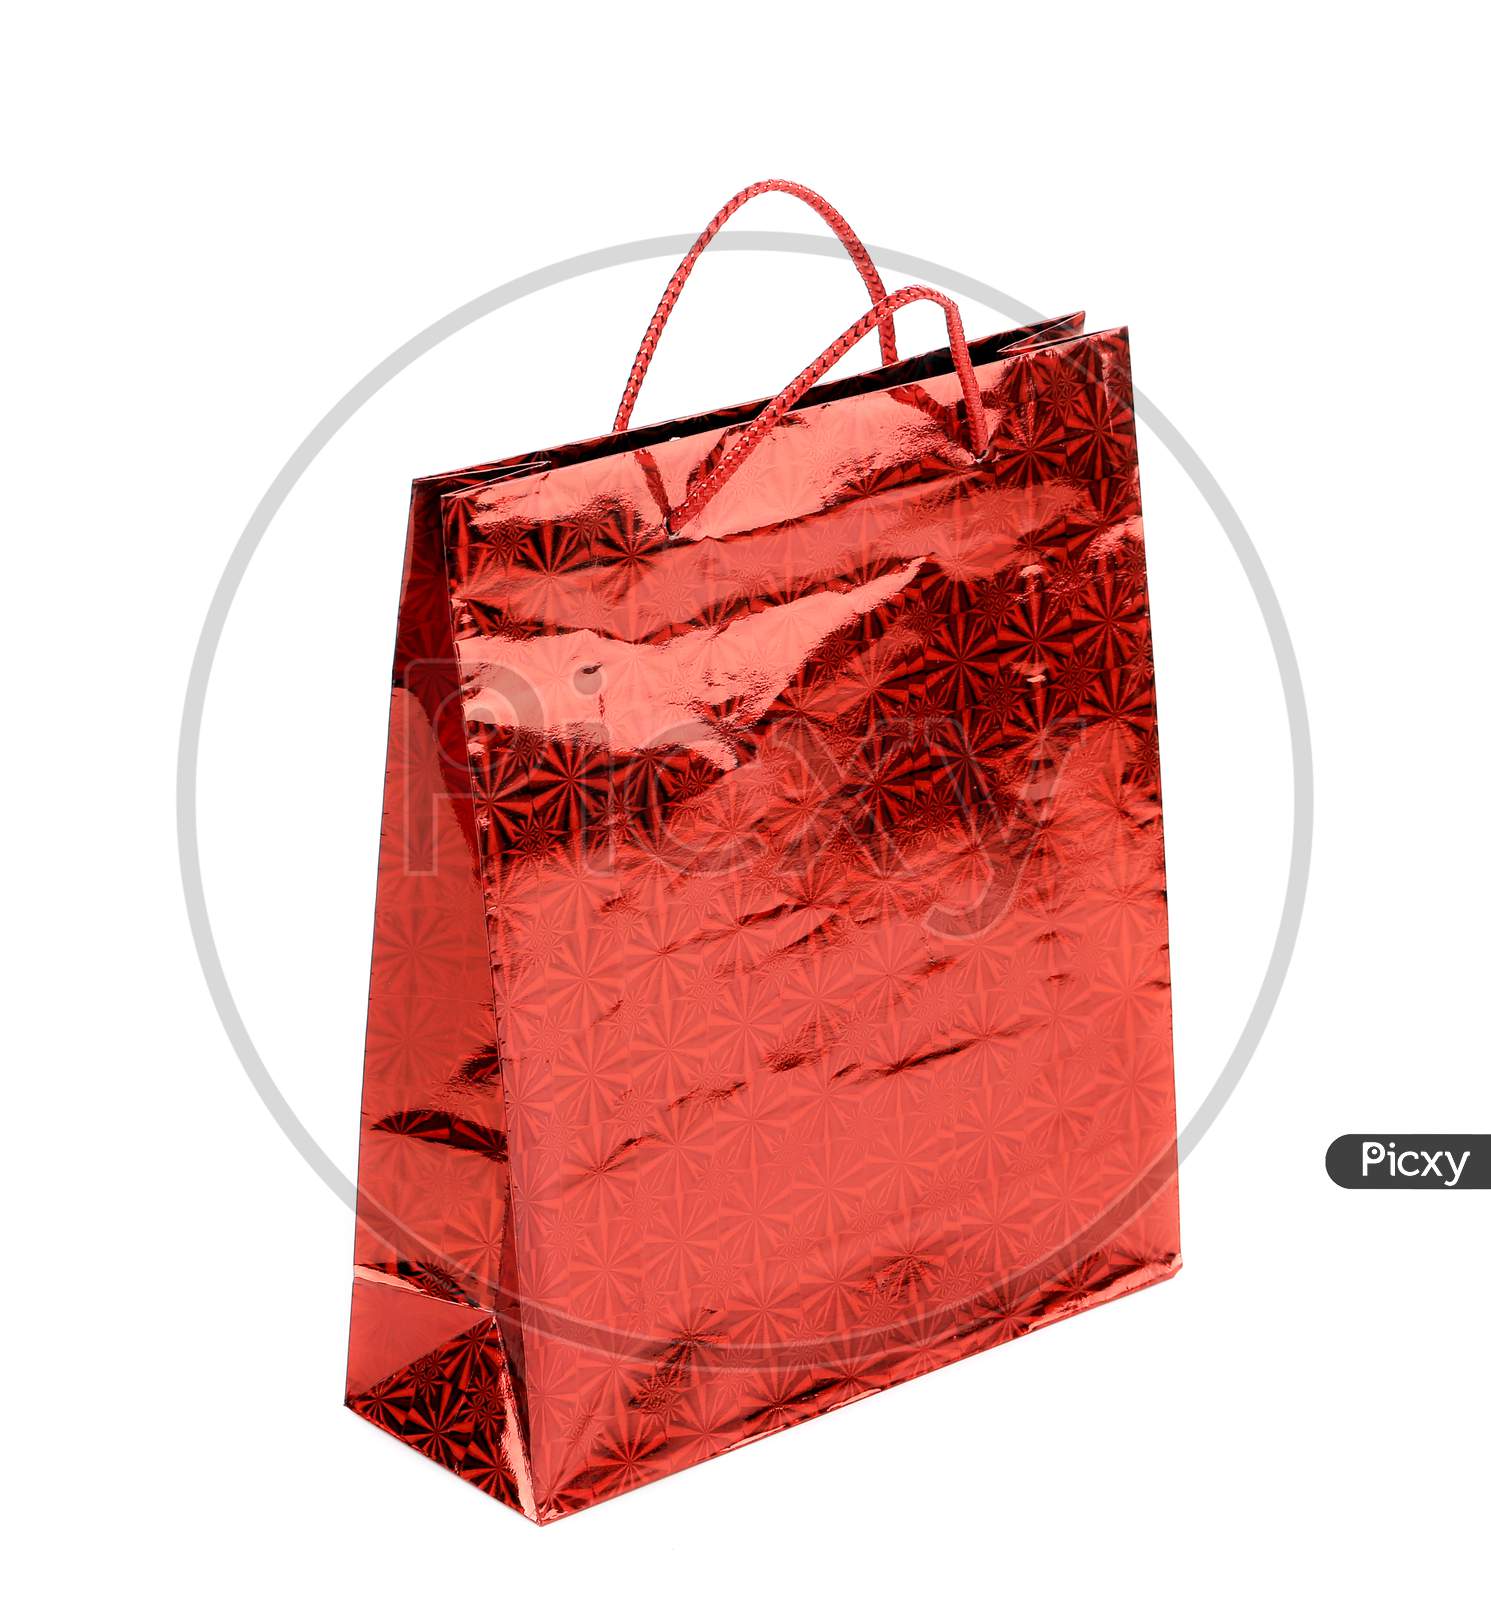 Red Gift Paper Bag. Isolated On A White Background.